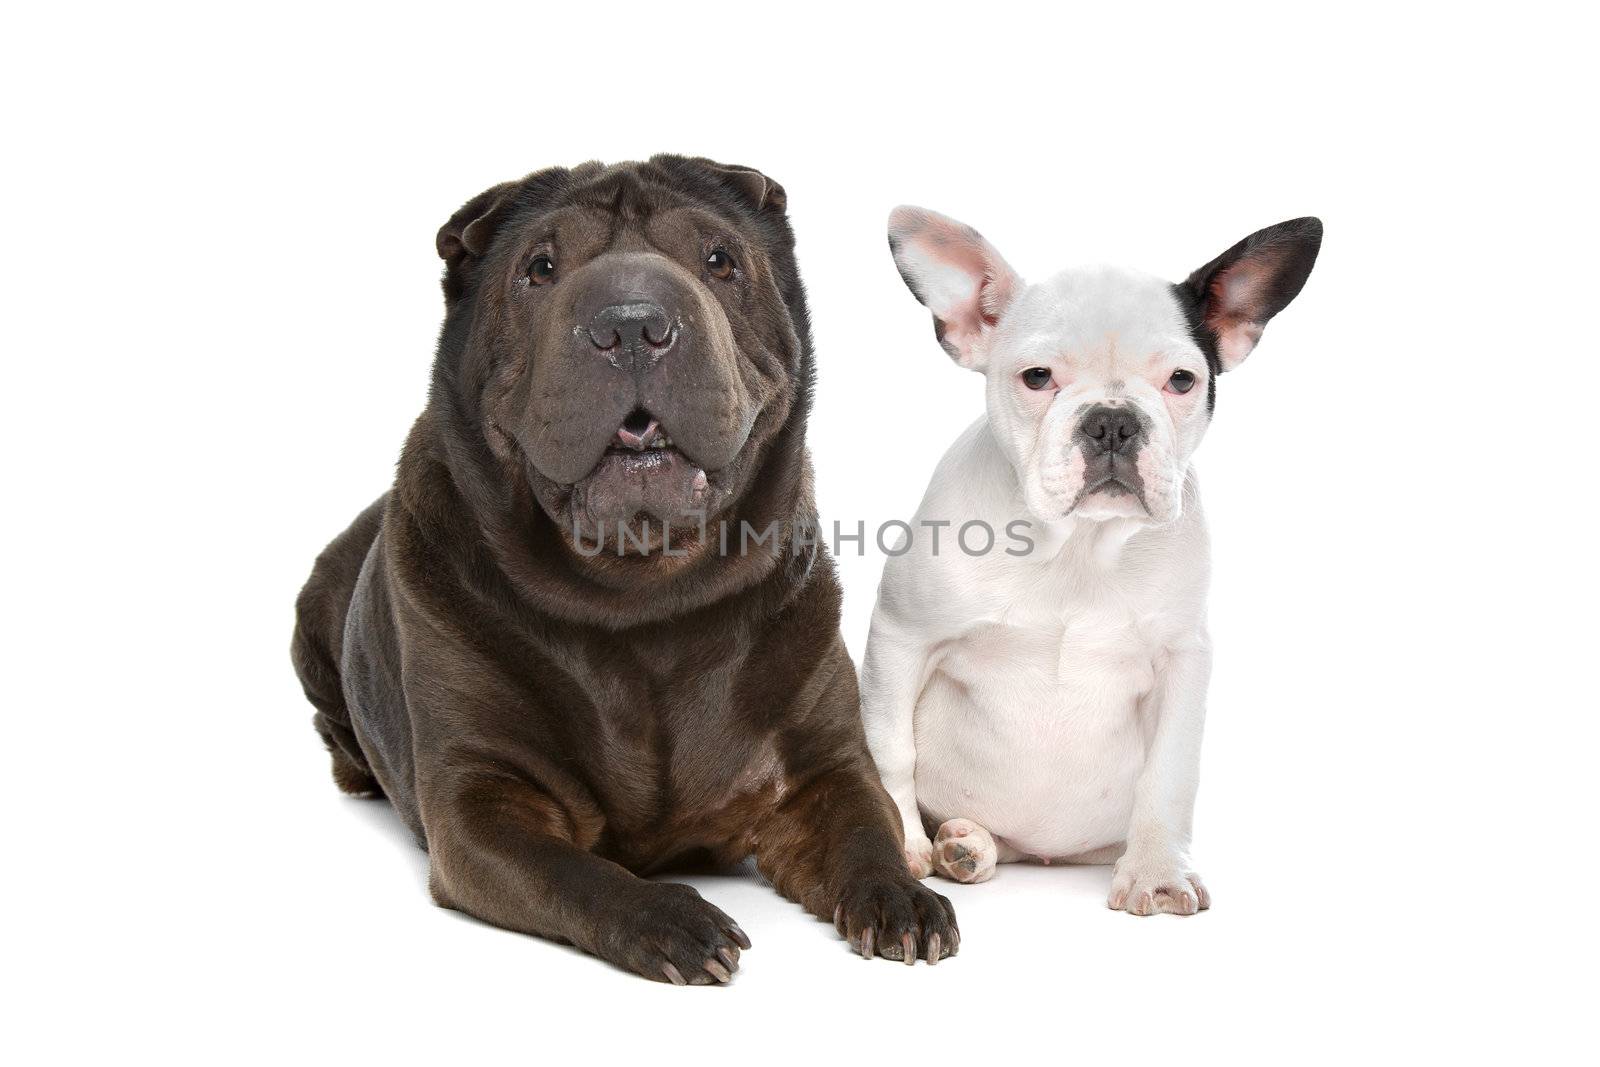 Shar-Pei and a French Bulldog puppy by eriklam